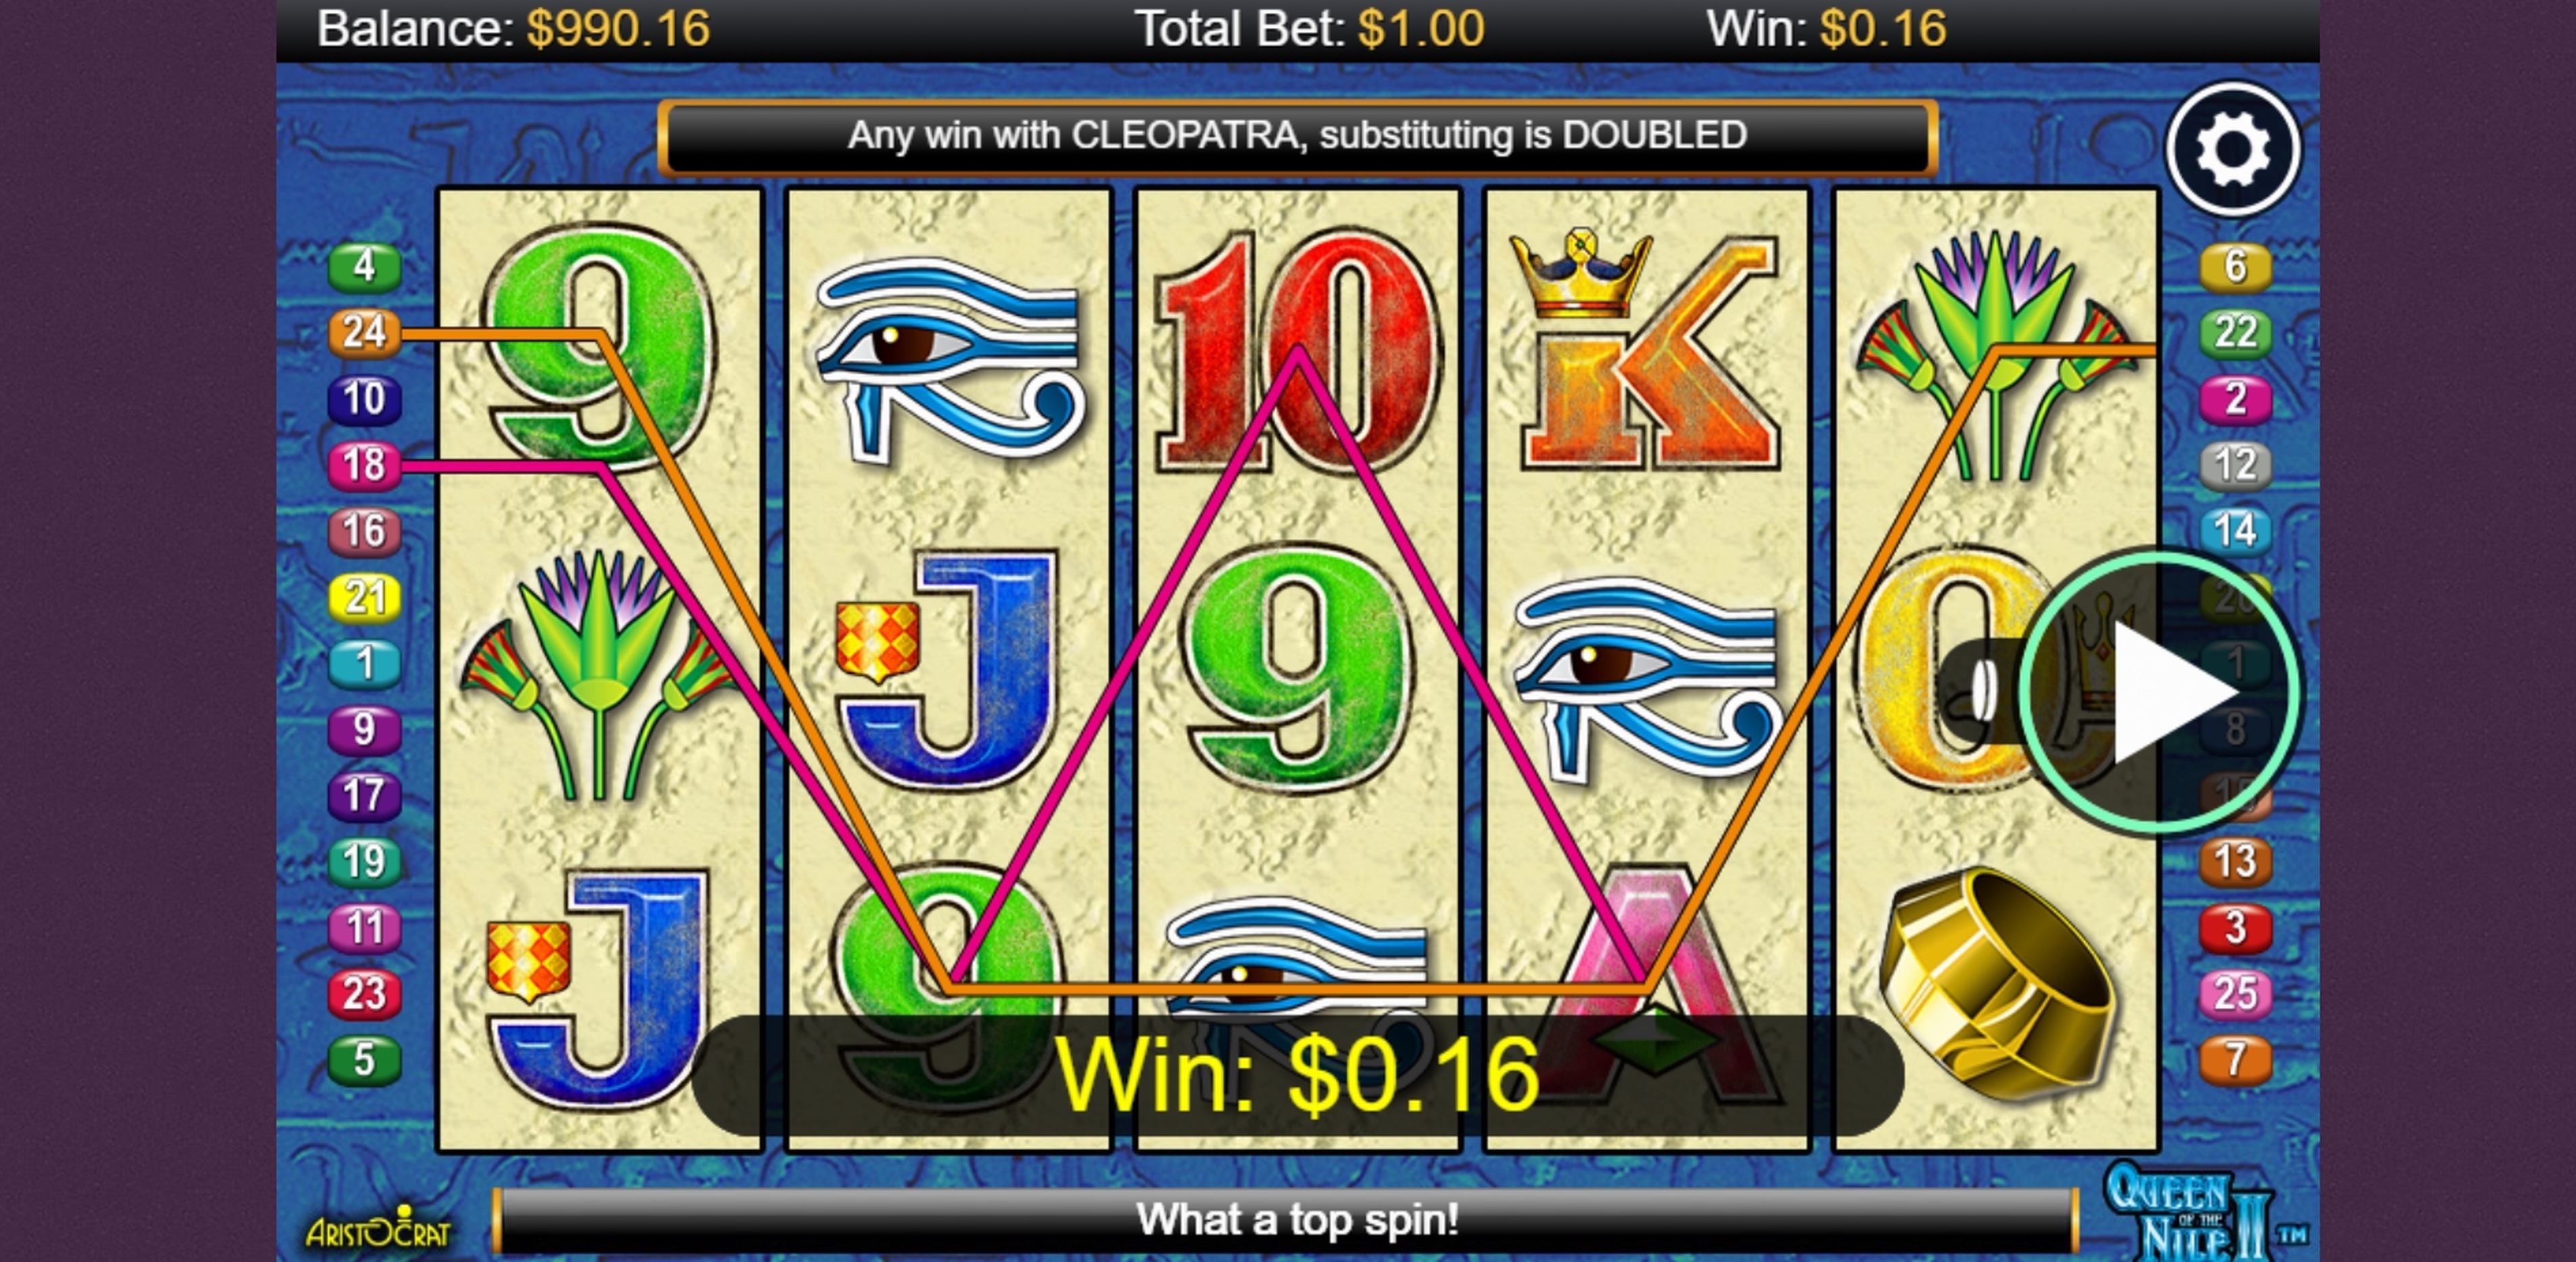 Win Money in Queen of the Nile 2 Free Slot Game by Aristocrat